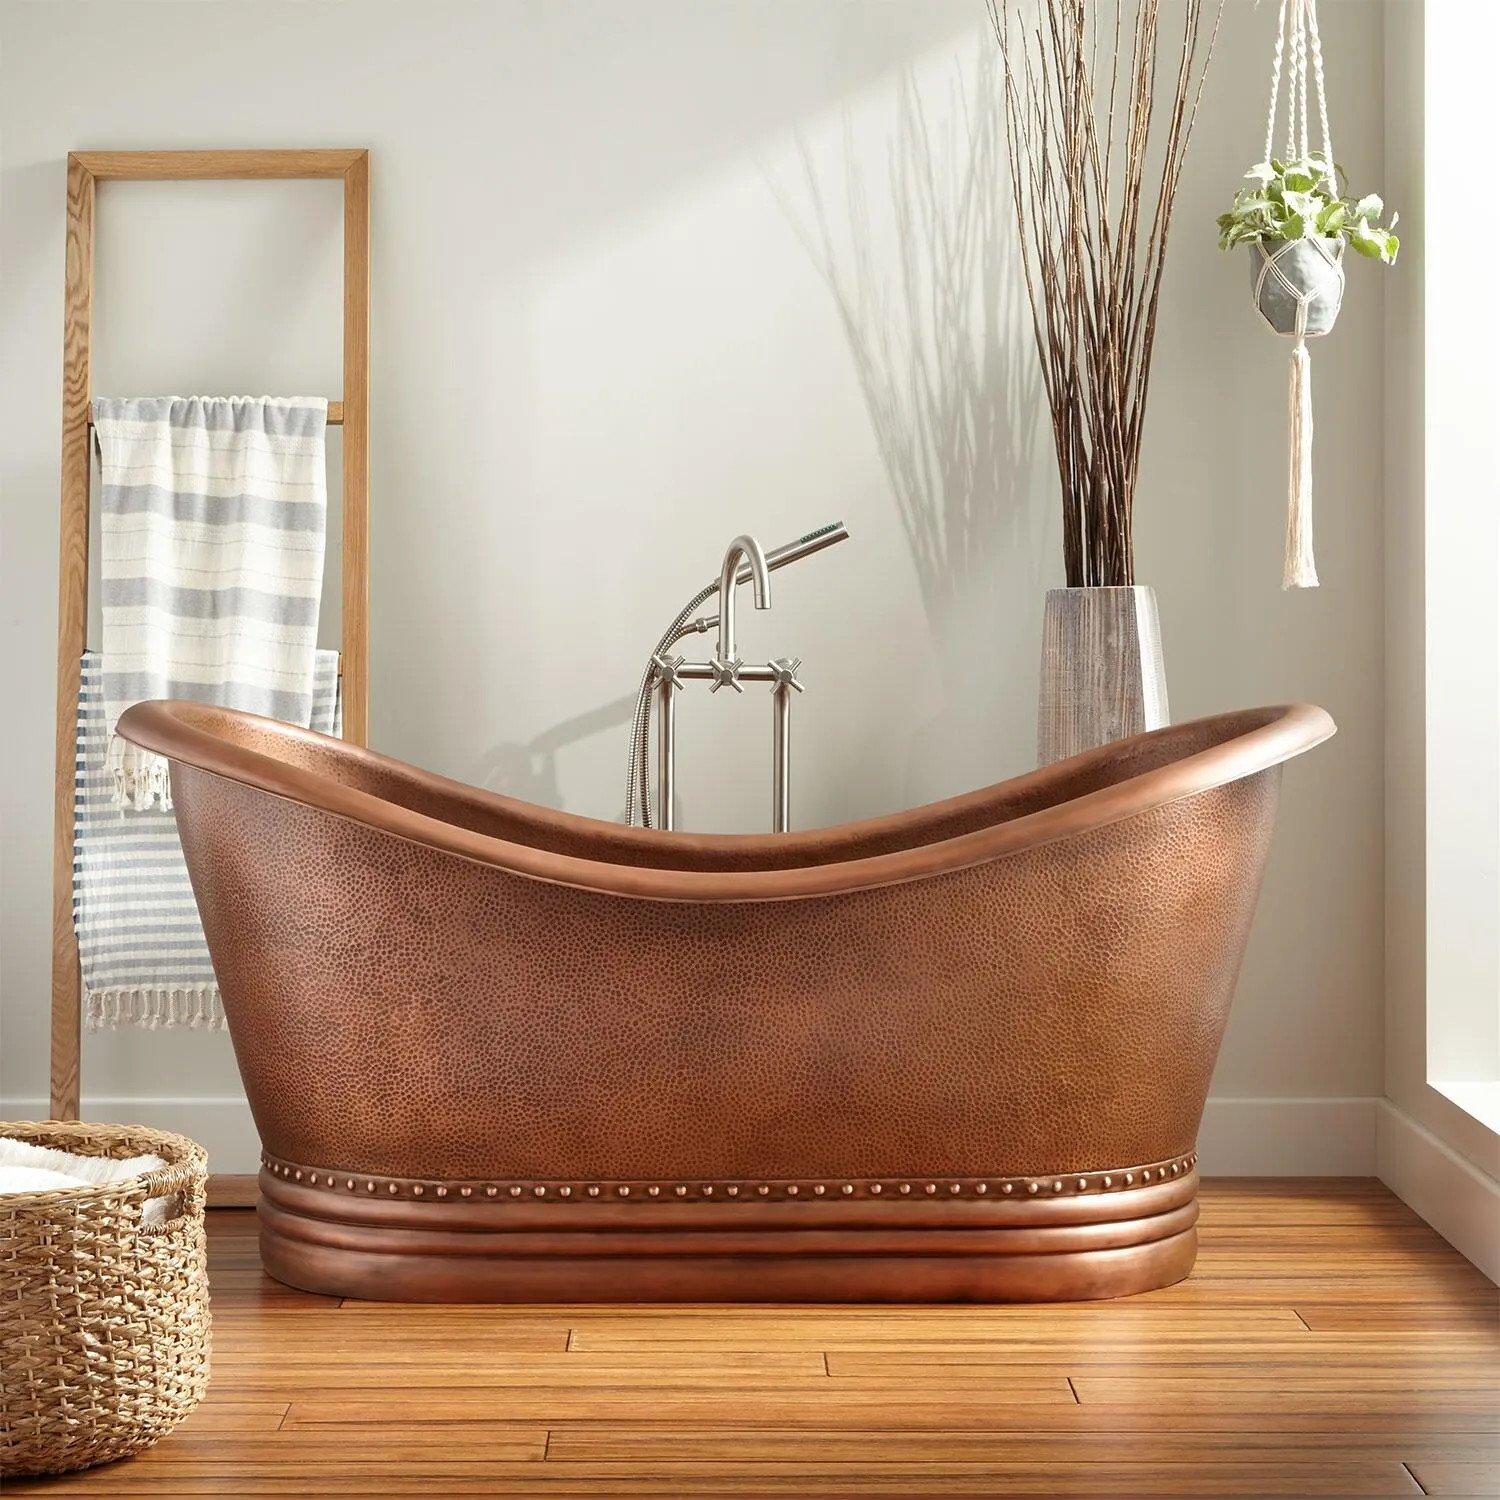 Freestanding Copper Tubs